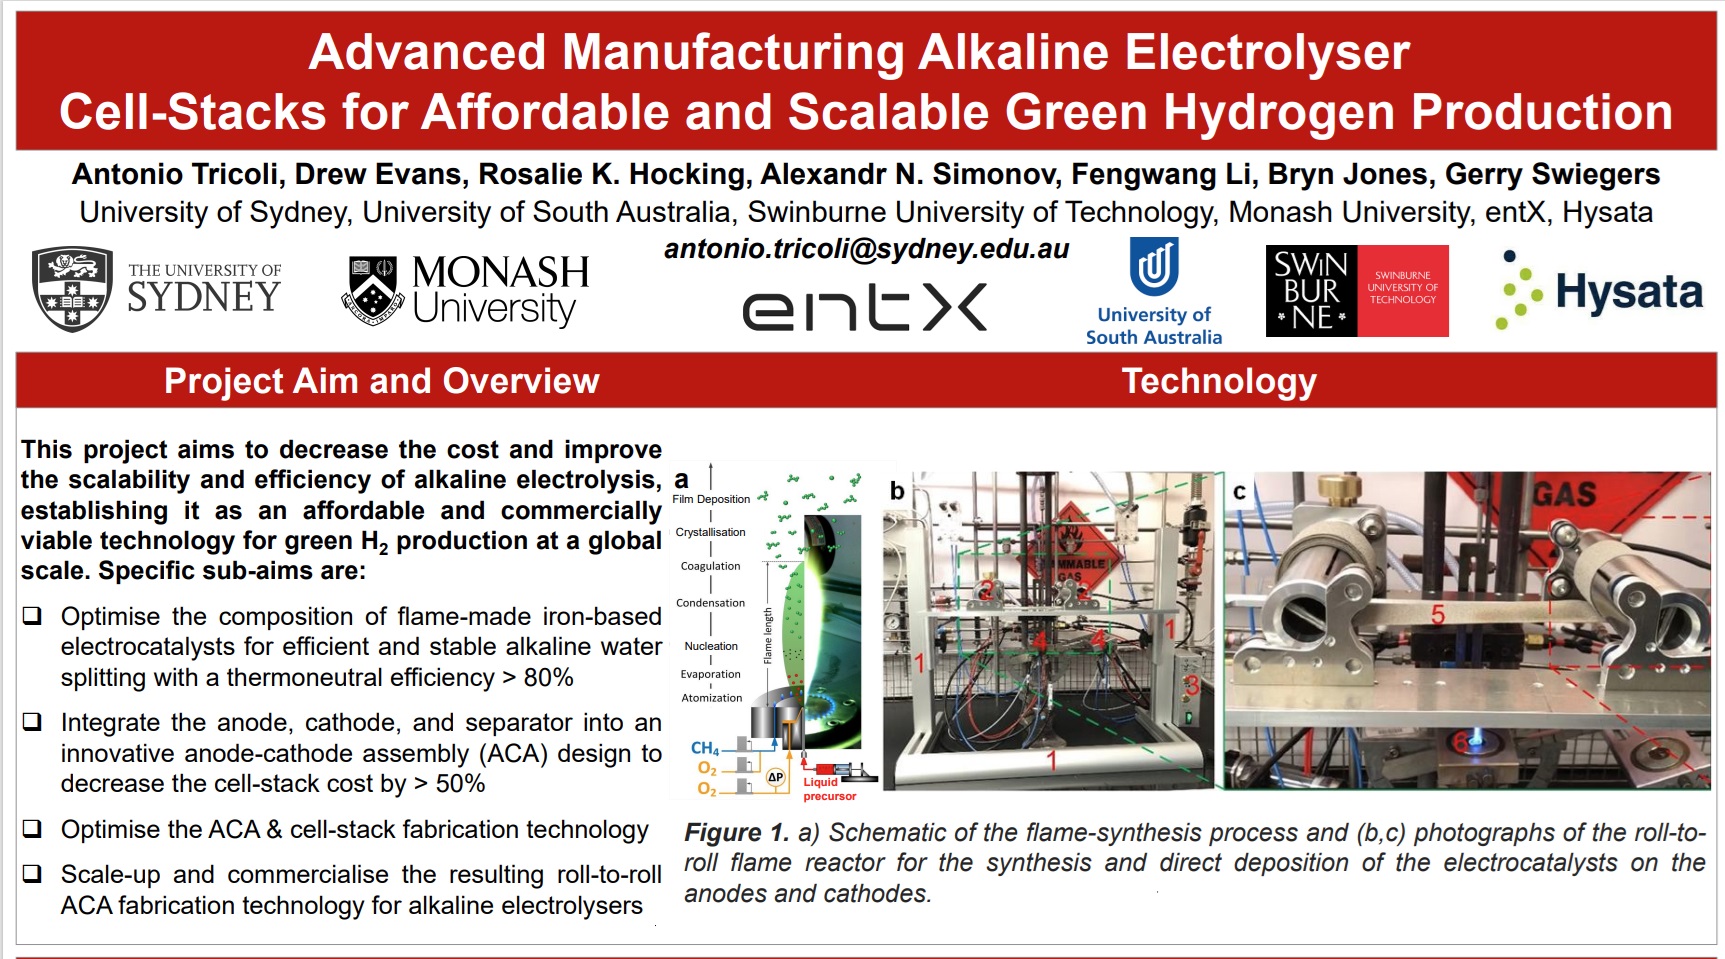 USYD - Advanced manufacturing alkaline electrolyser cell-stacks for green hydrogen - Poster - Cover